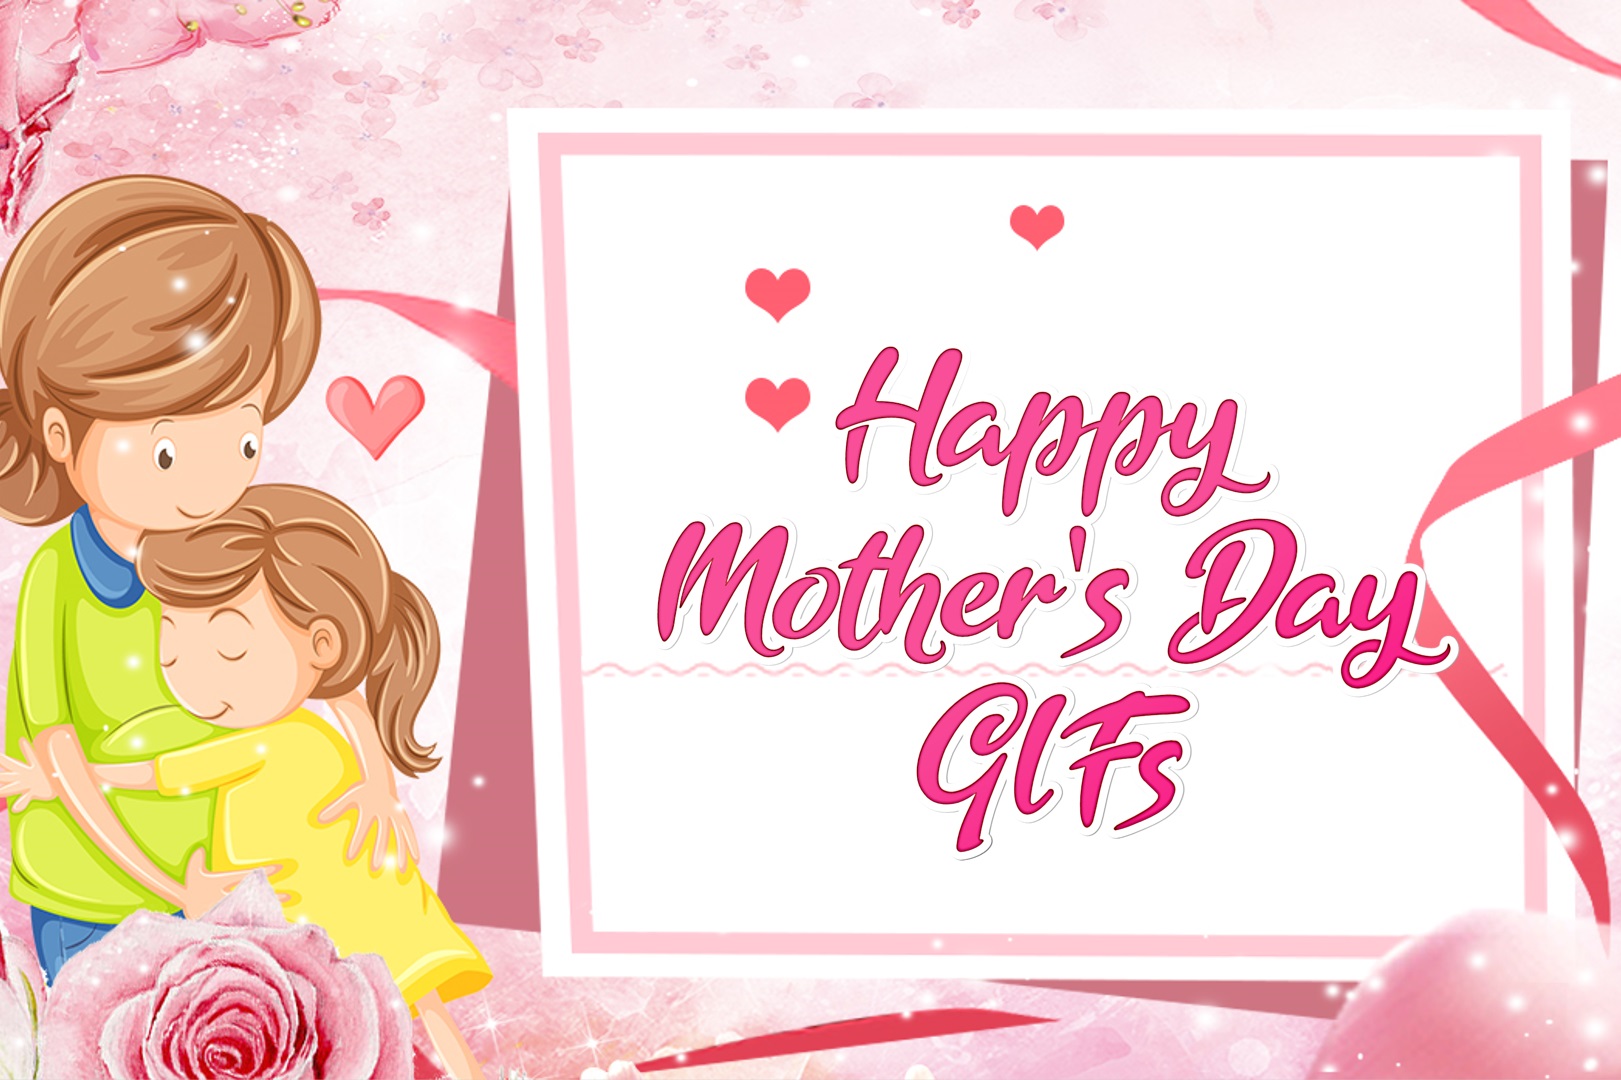 Happy Mother's Day 2023 Animated GIFs | SuperbWishes.com